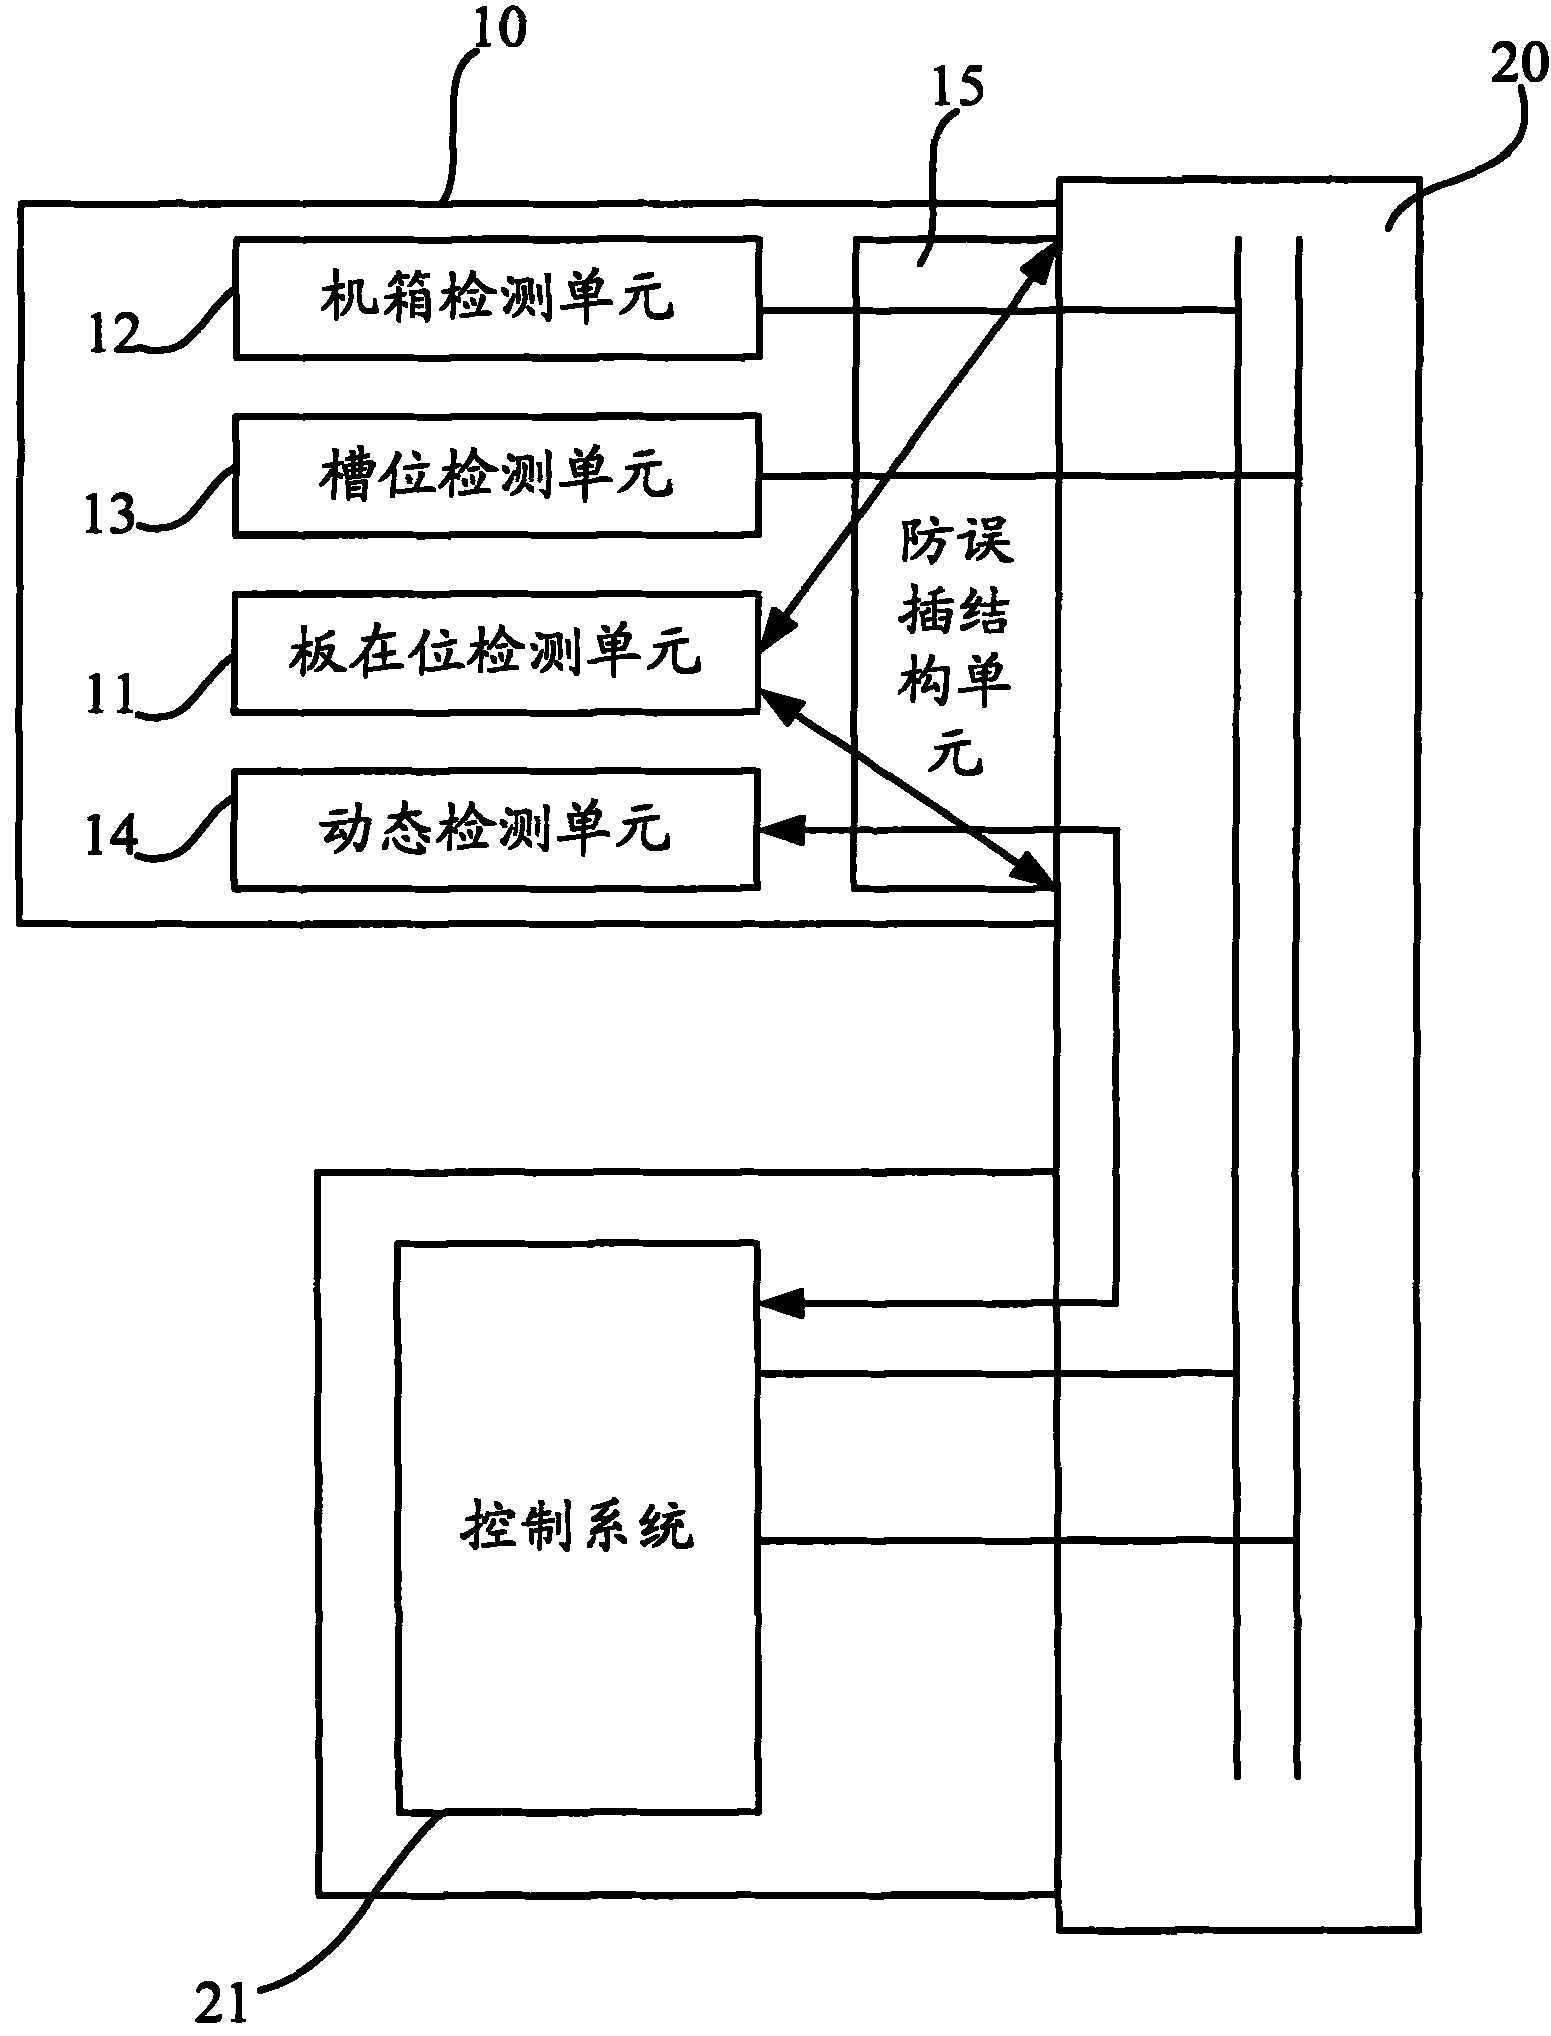 Interface system ensuring connection reliability between sub-card and backing plate, backing plate and method